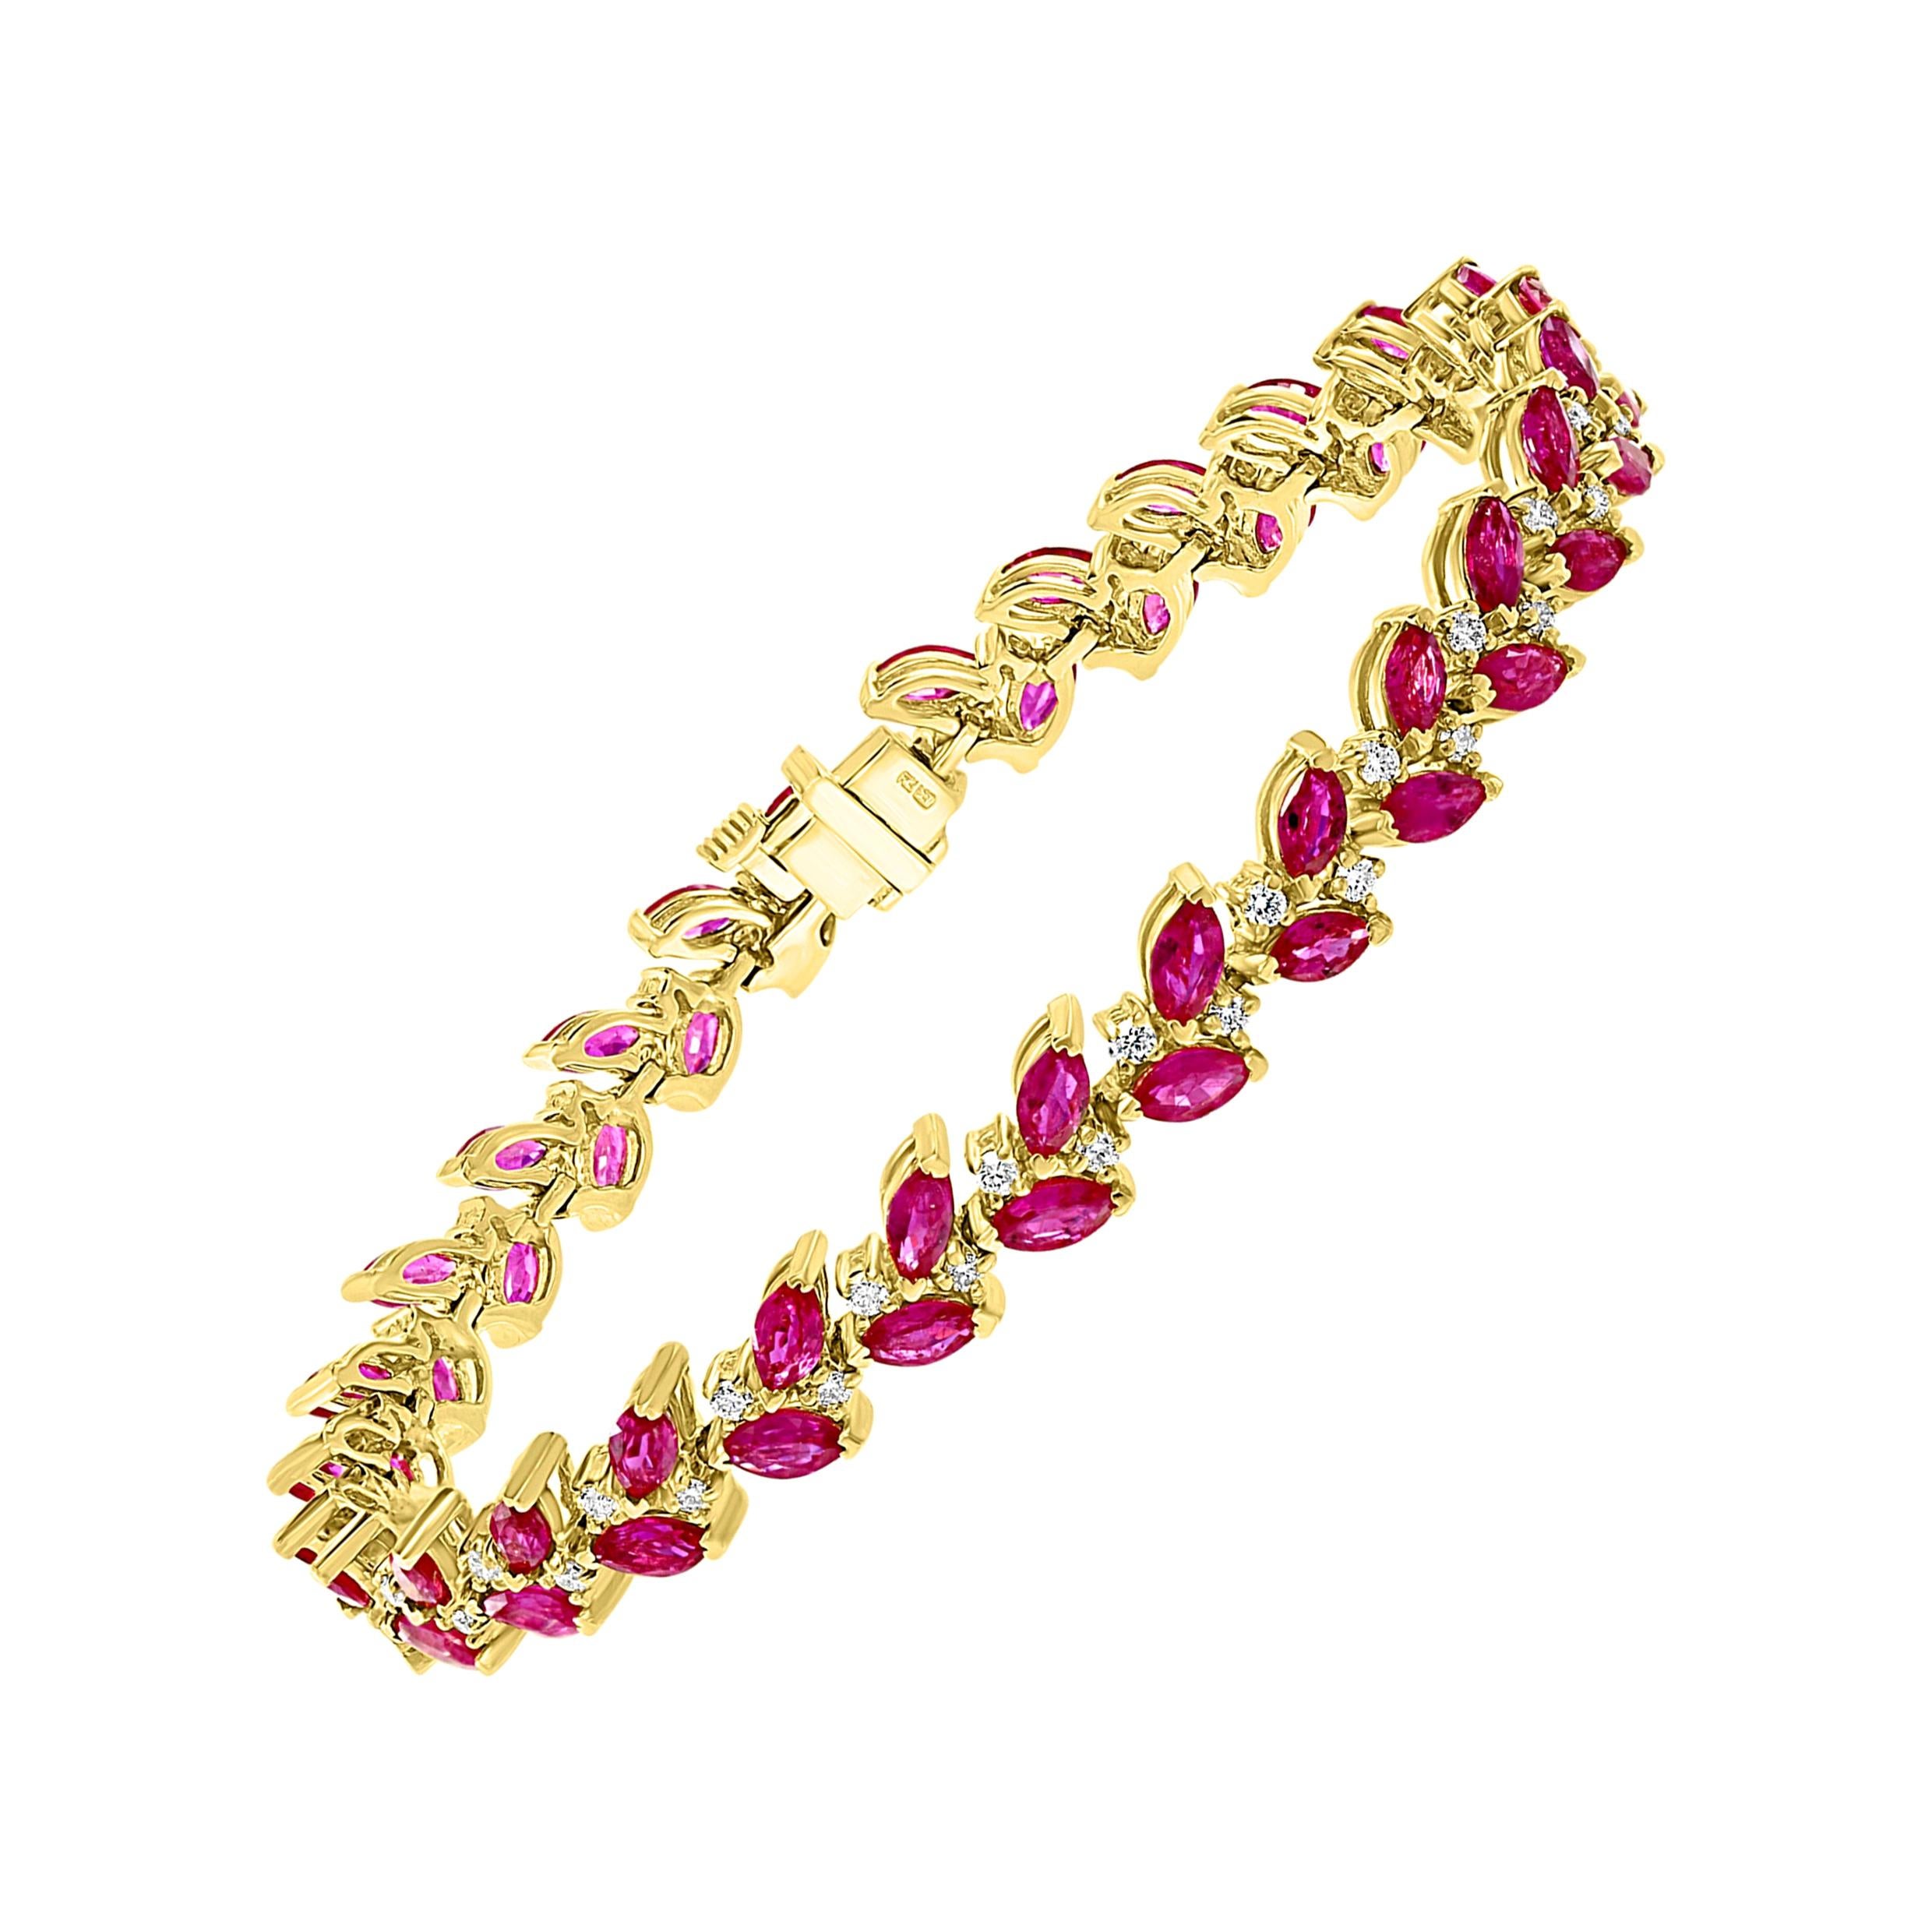 12 Carat Natural Marquise Ruby and Diamond Tennis Bracelet 14 Karat Yellow Gold For Sale